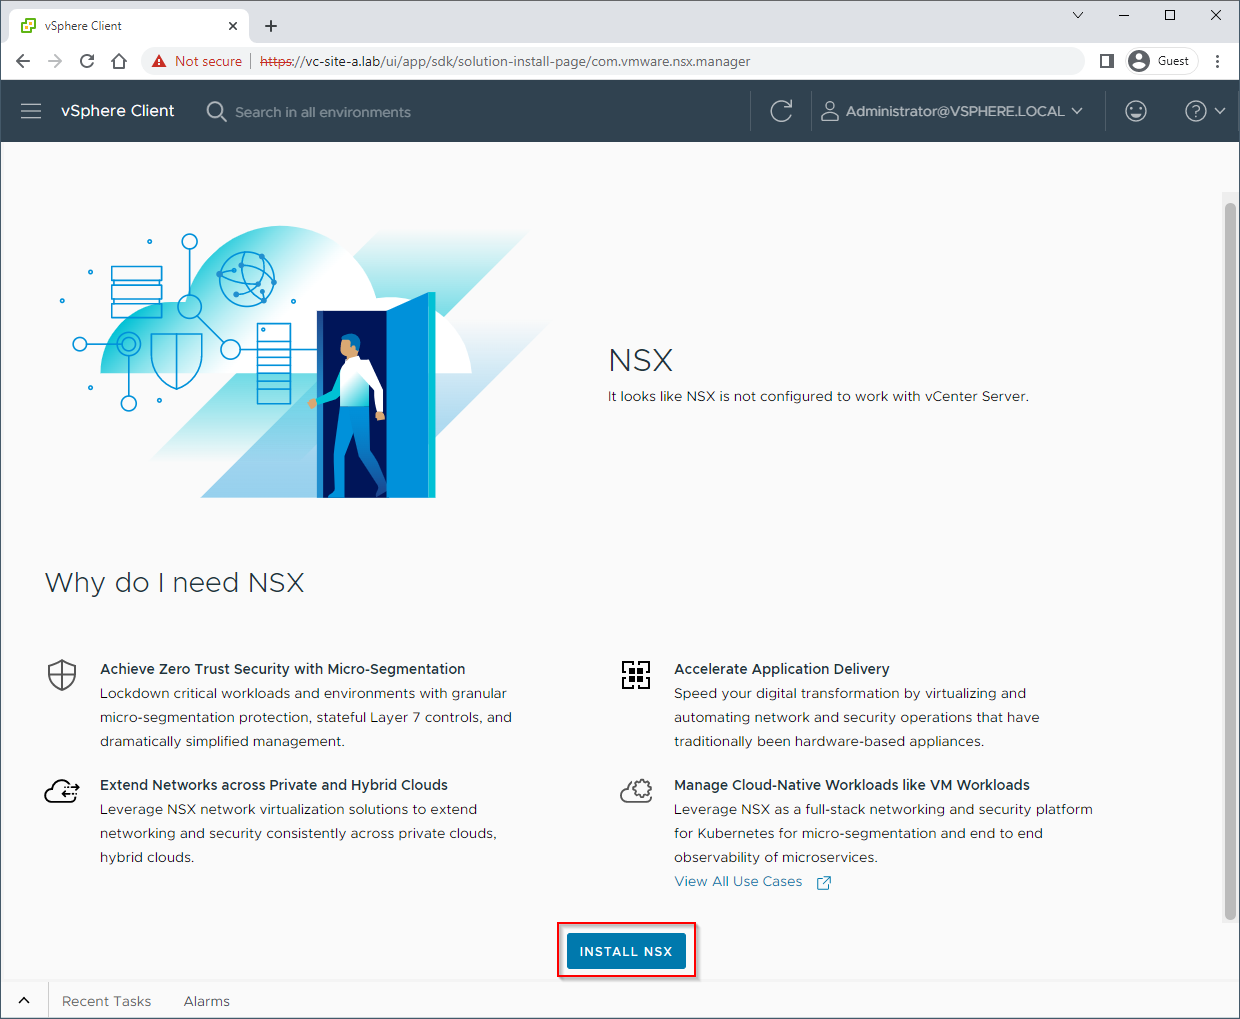 Select Install NSX